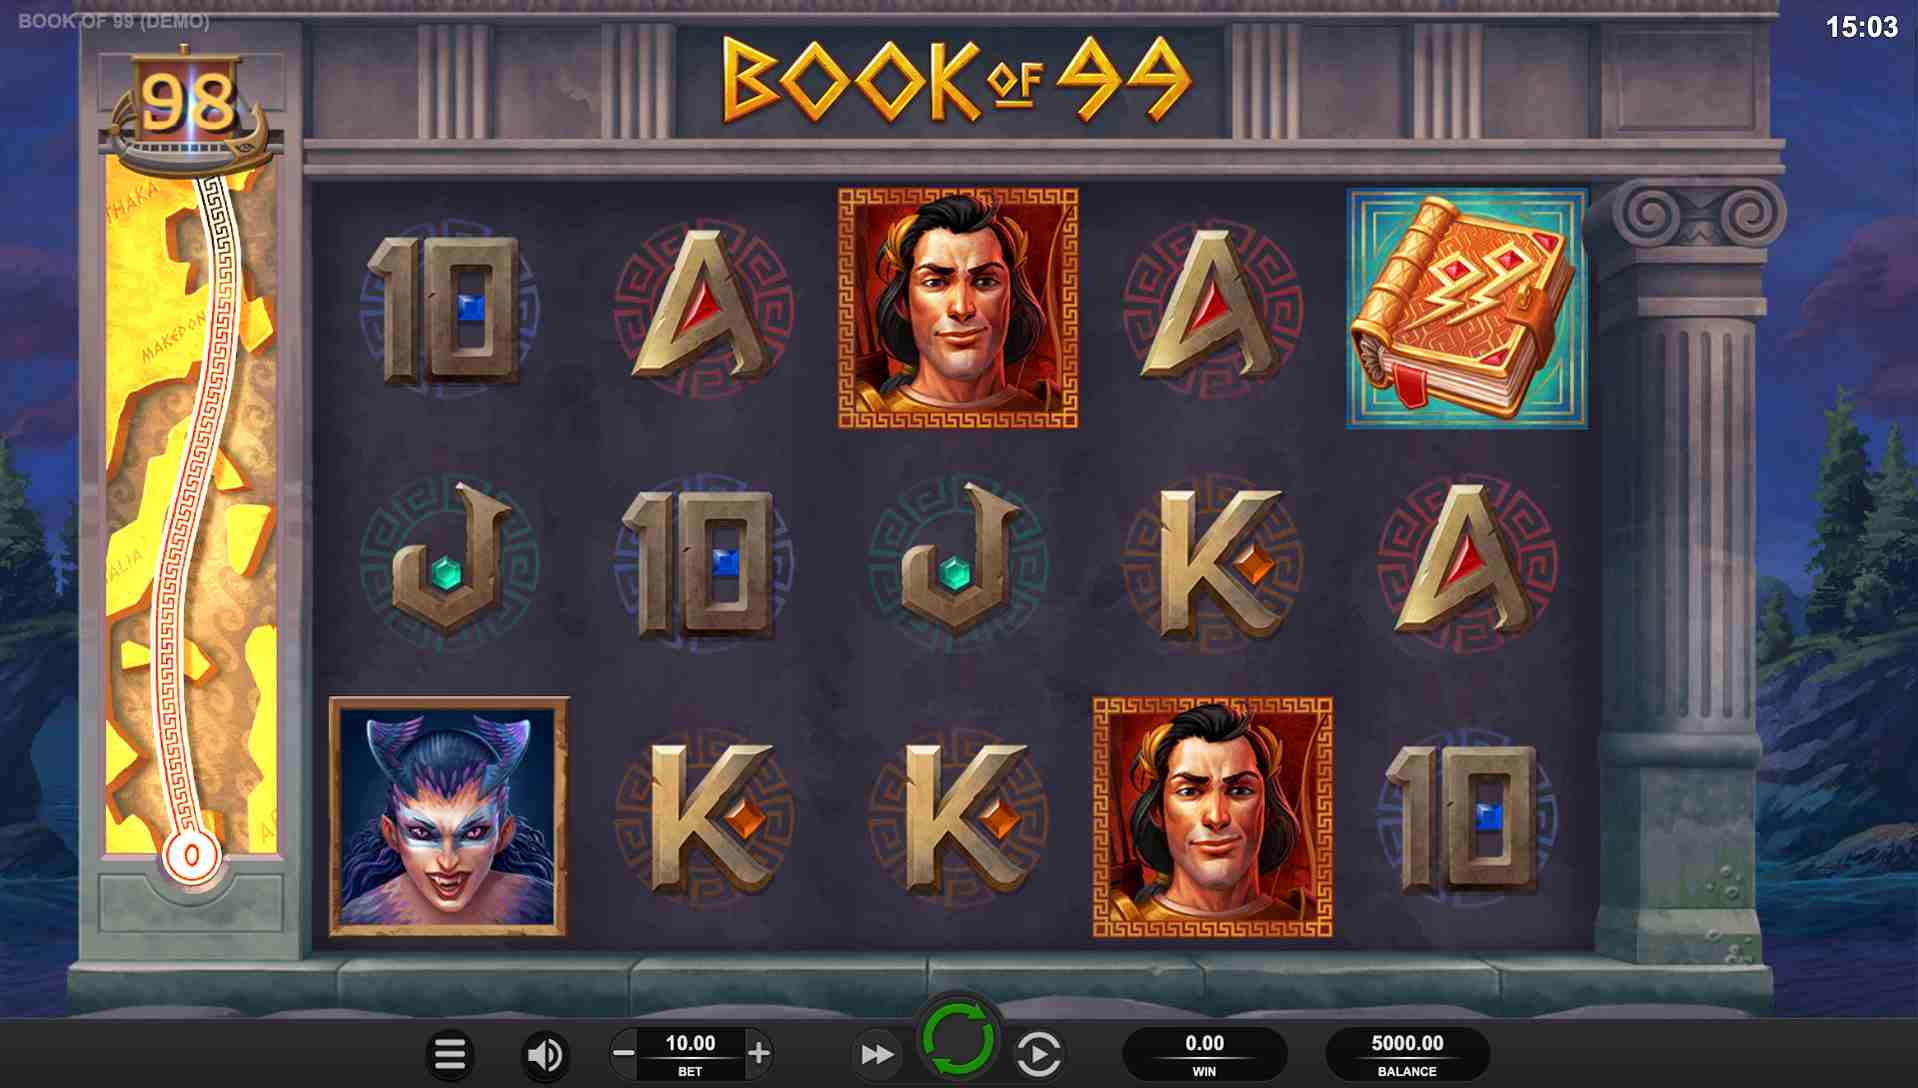 book of 99 real money slot